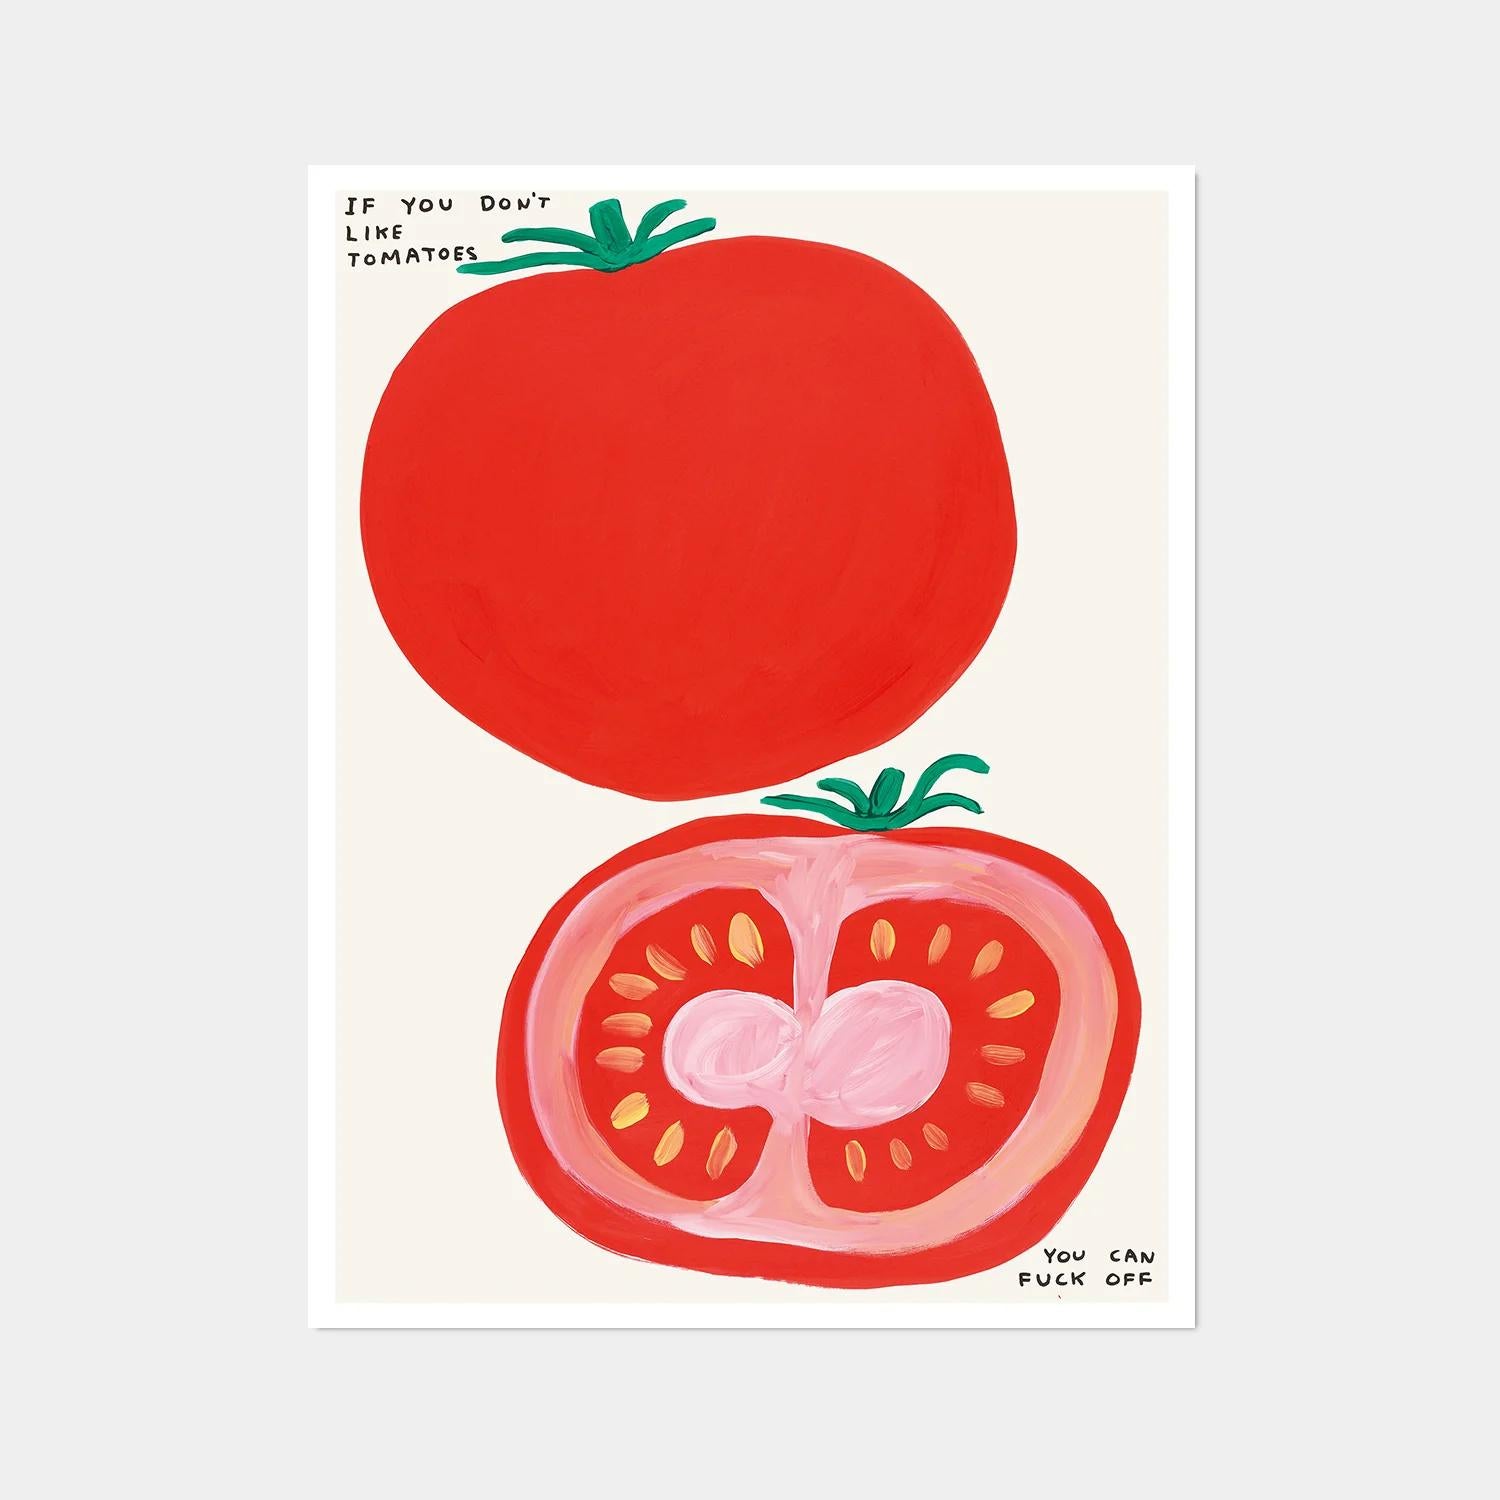 David Shrigley, If You Don't Like Tomatoes (framed), 2020 For Sale 1